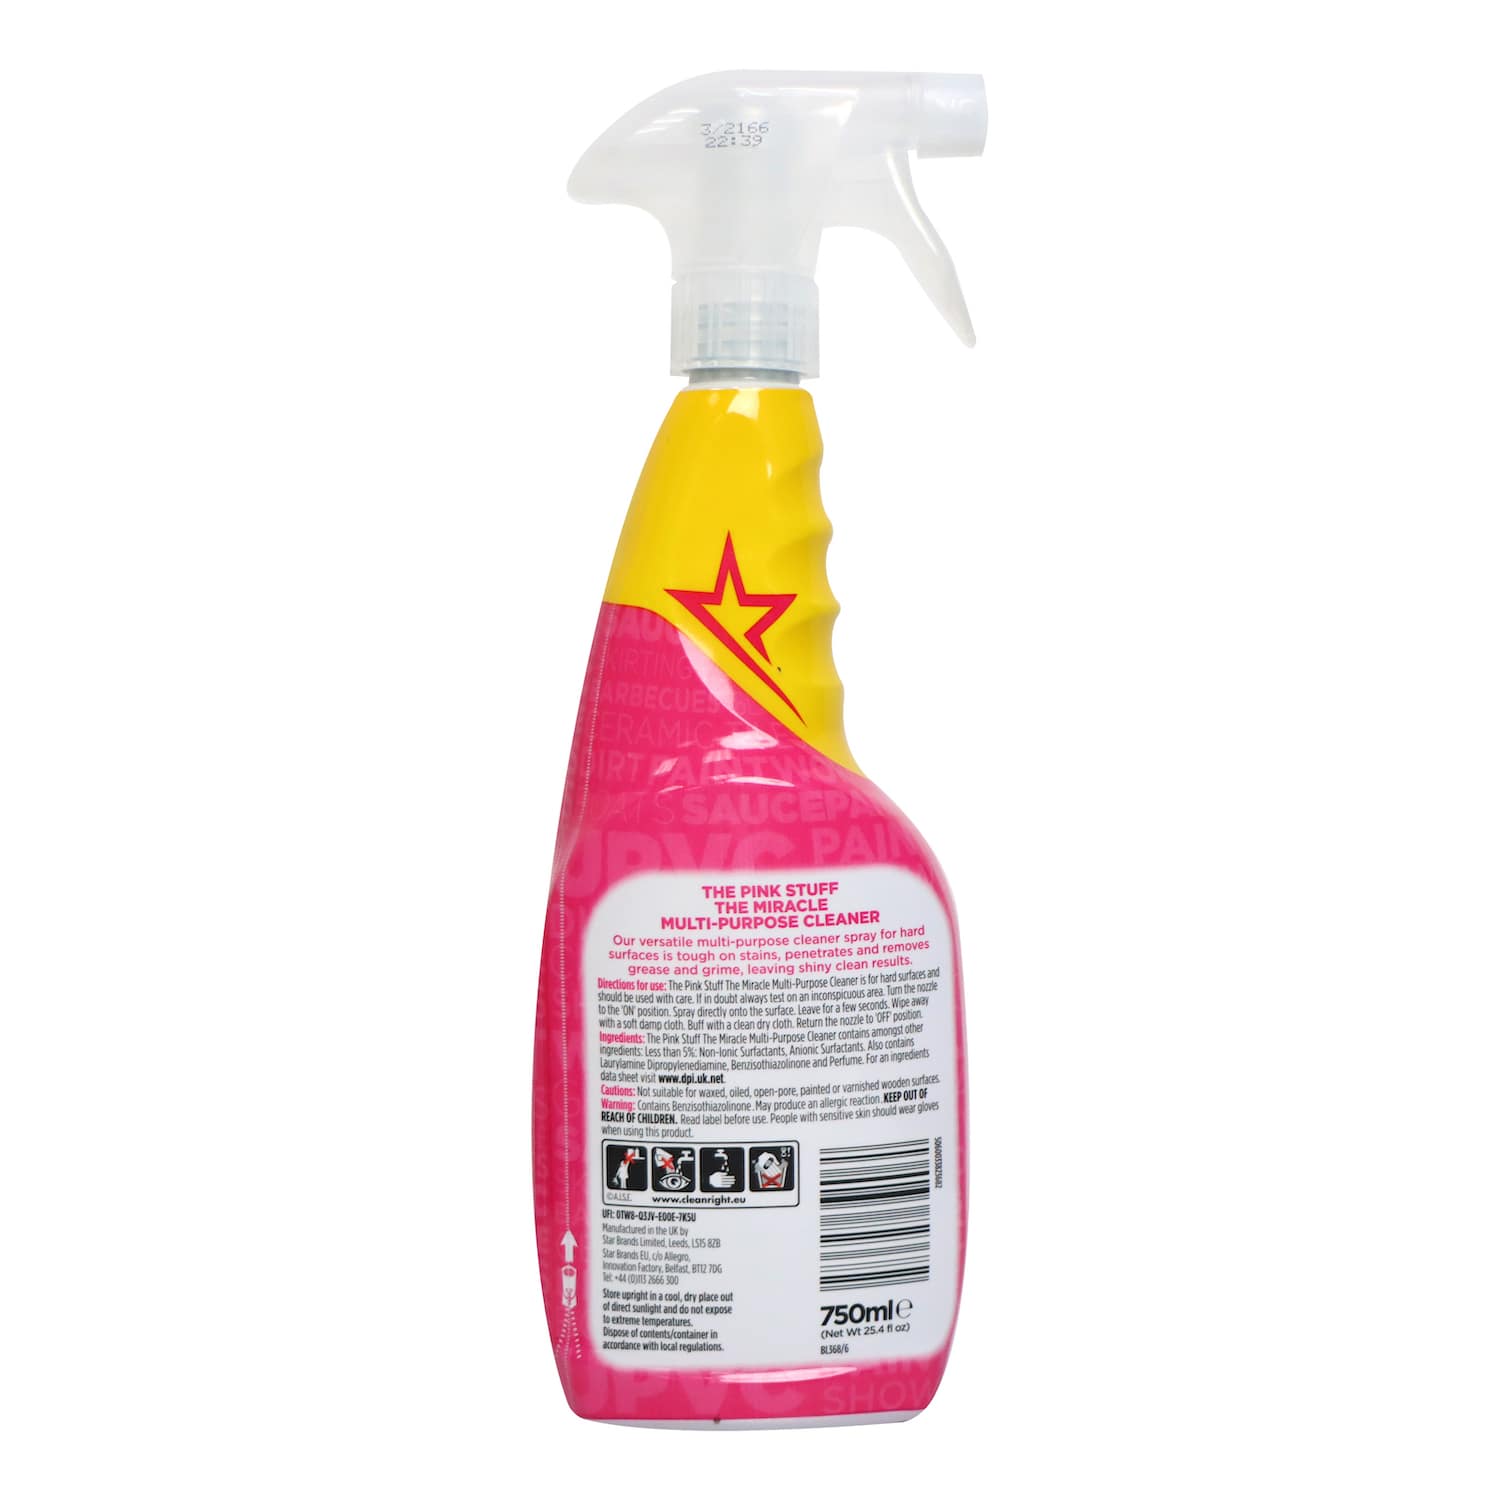  The Pink Stuff The Miracle Multi-Purpose Cleaner 750ml Spray  WHIGT, 26 Fl Oz (Pack of 3) : Health & Household